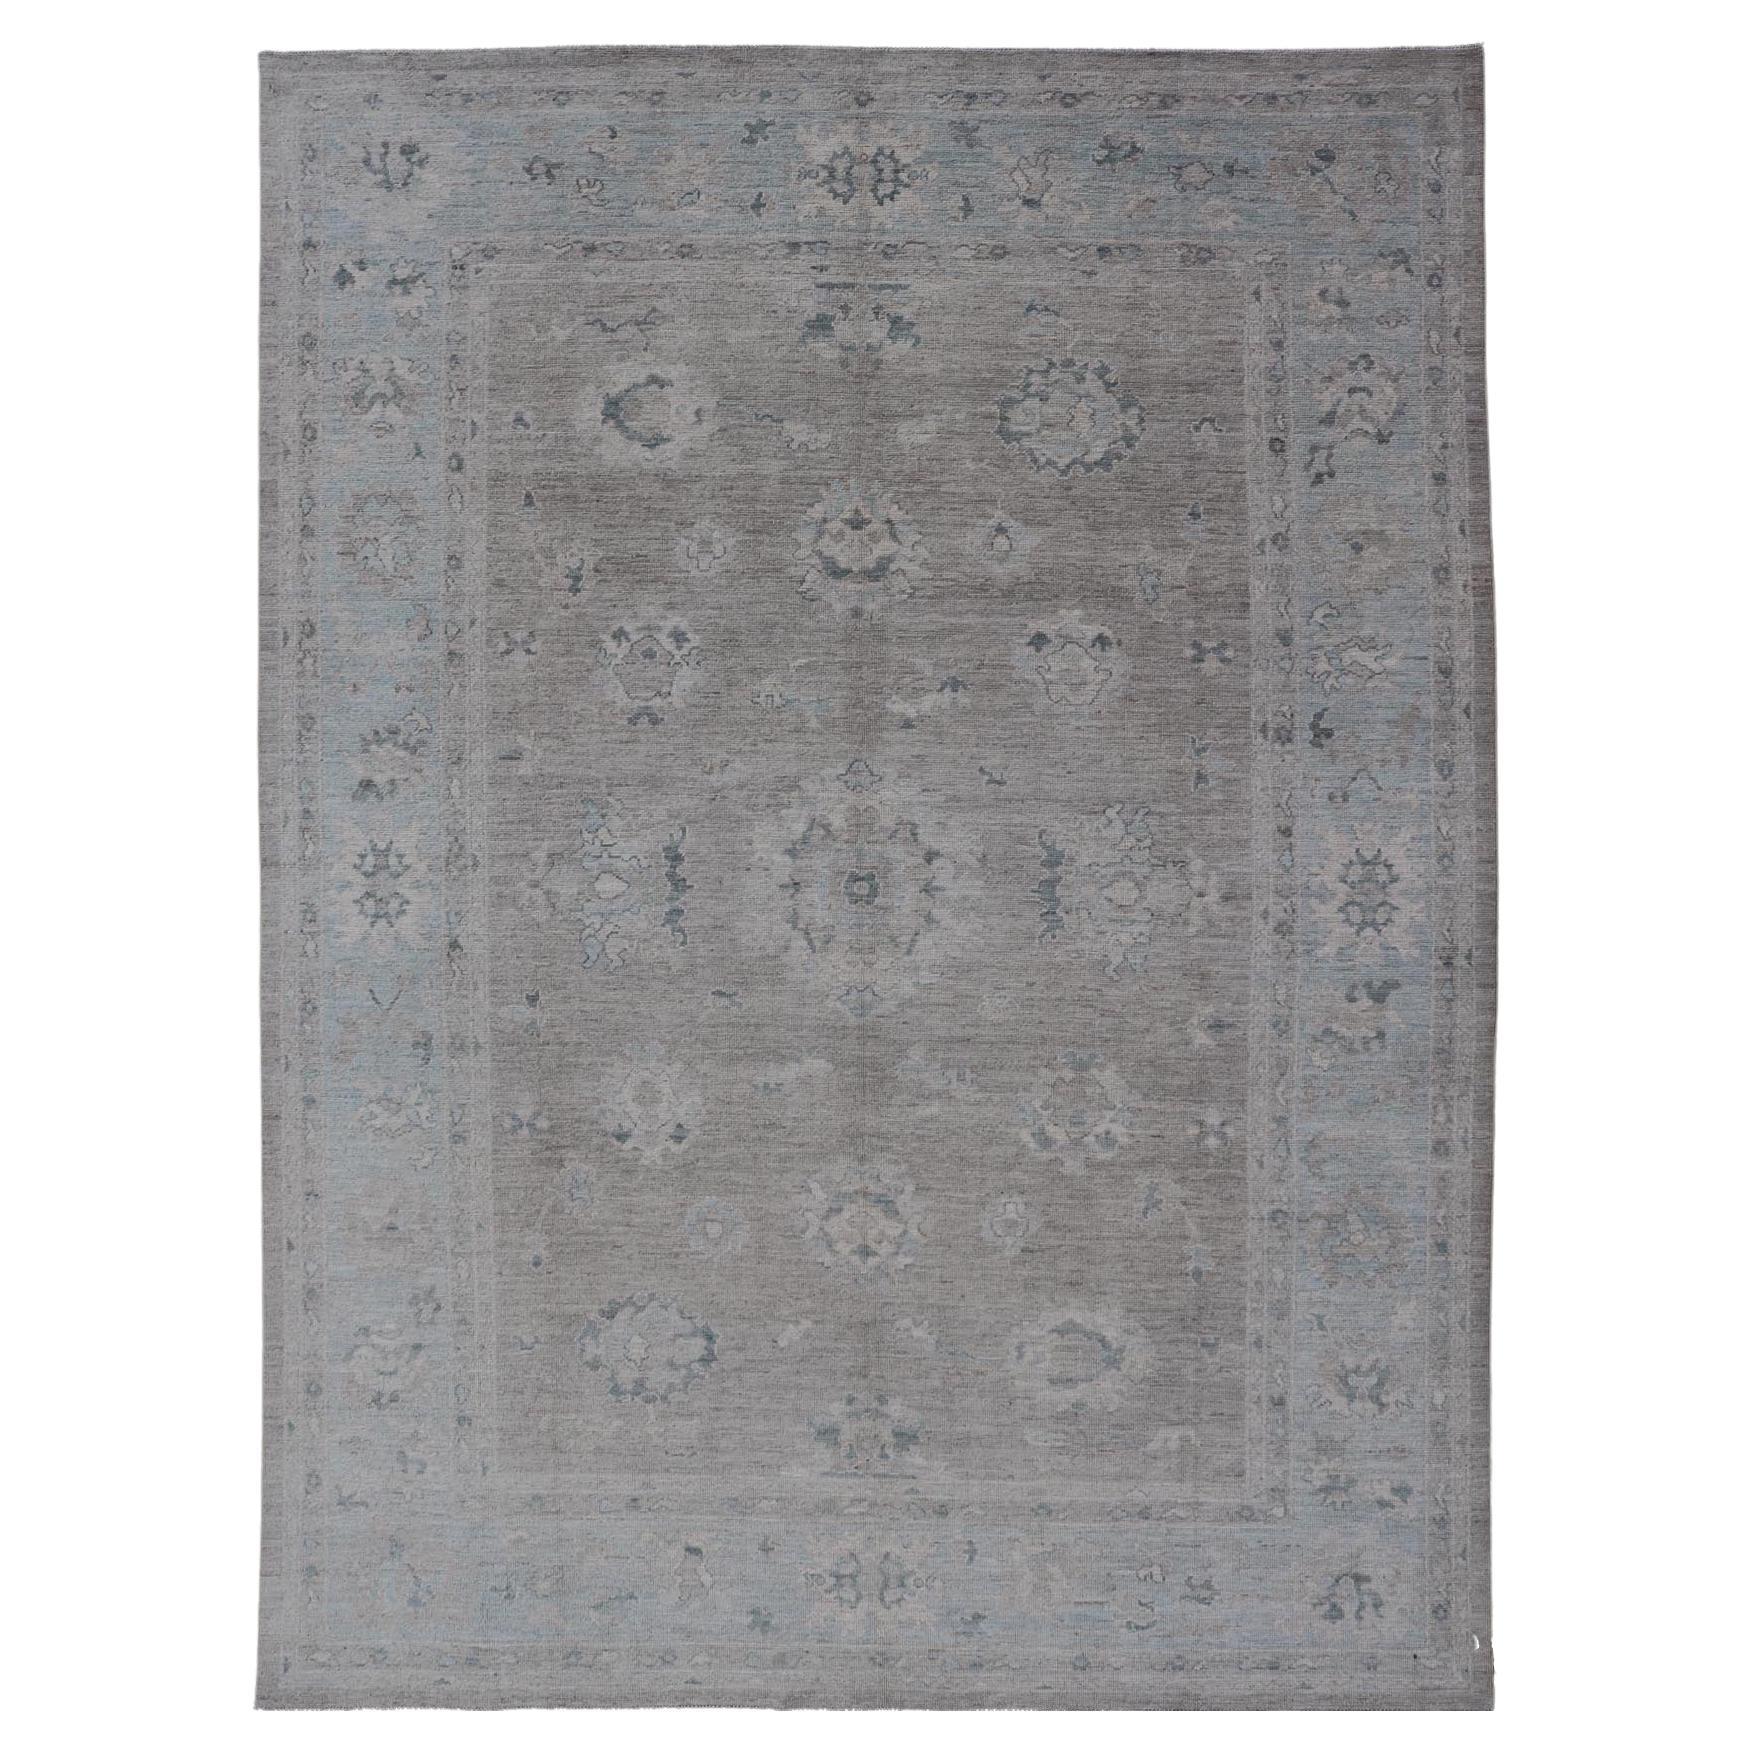 Large Modern Oushak with Floral Motifs in Wheat, Mushroom, Grey & Light Blue